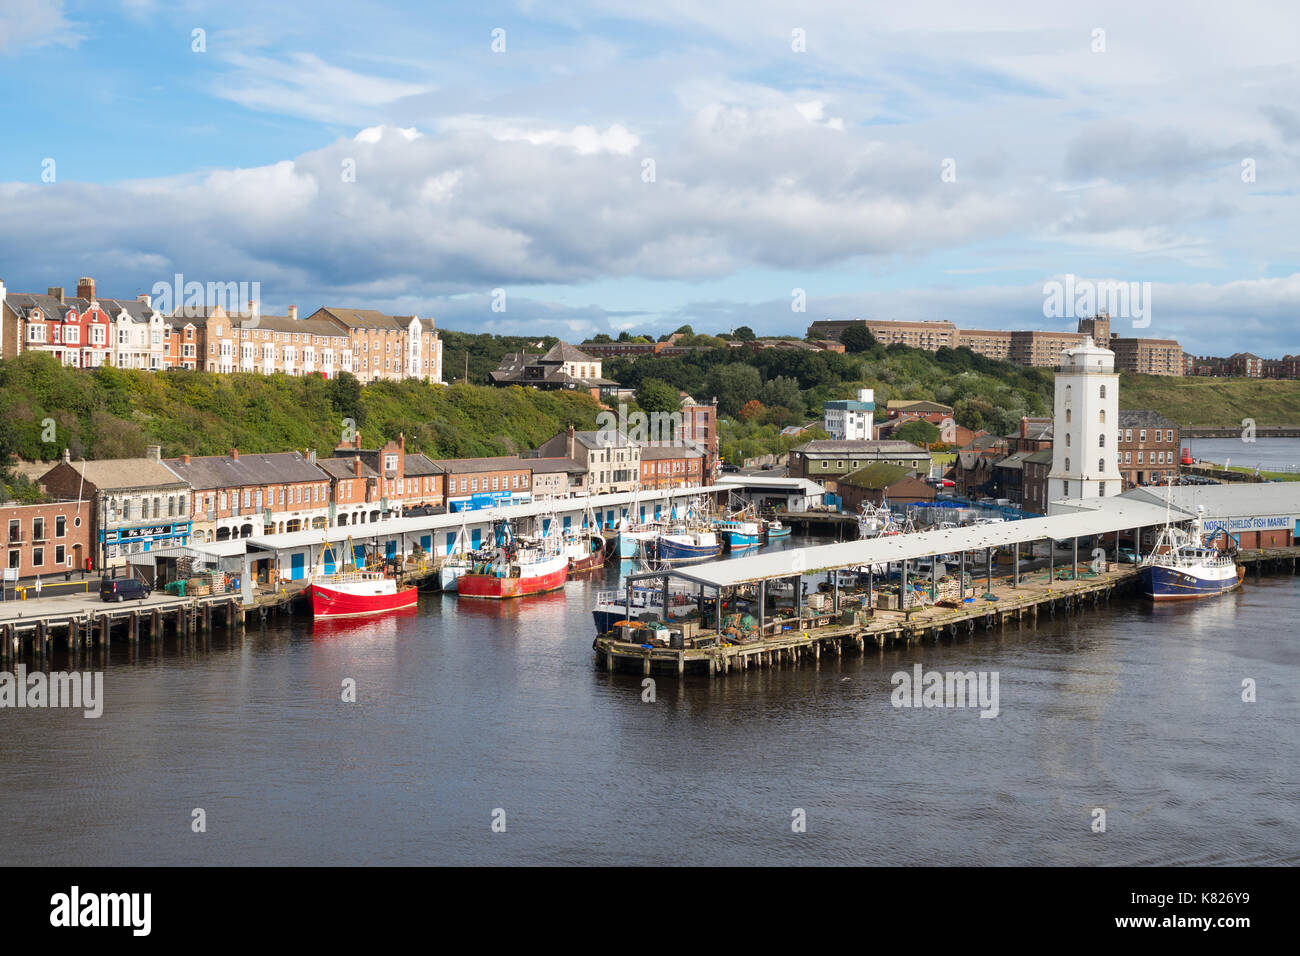 North Shields fish quay seen from the river Tyne, north east England, UK Stock Photo